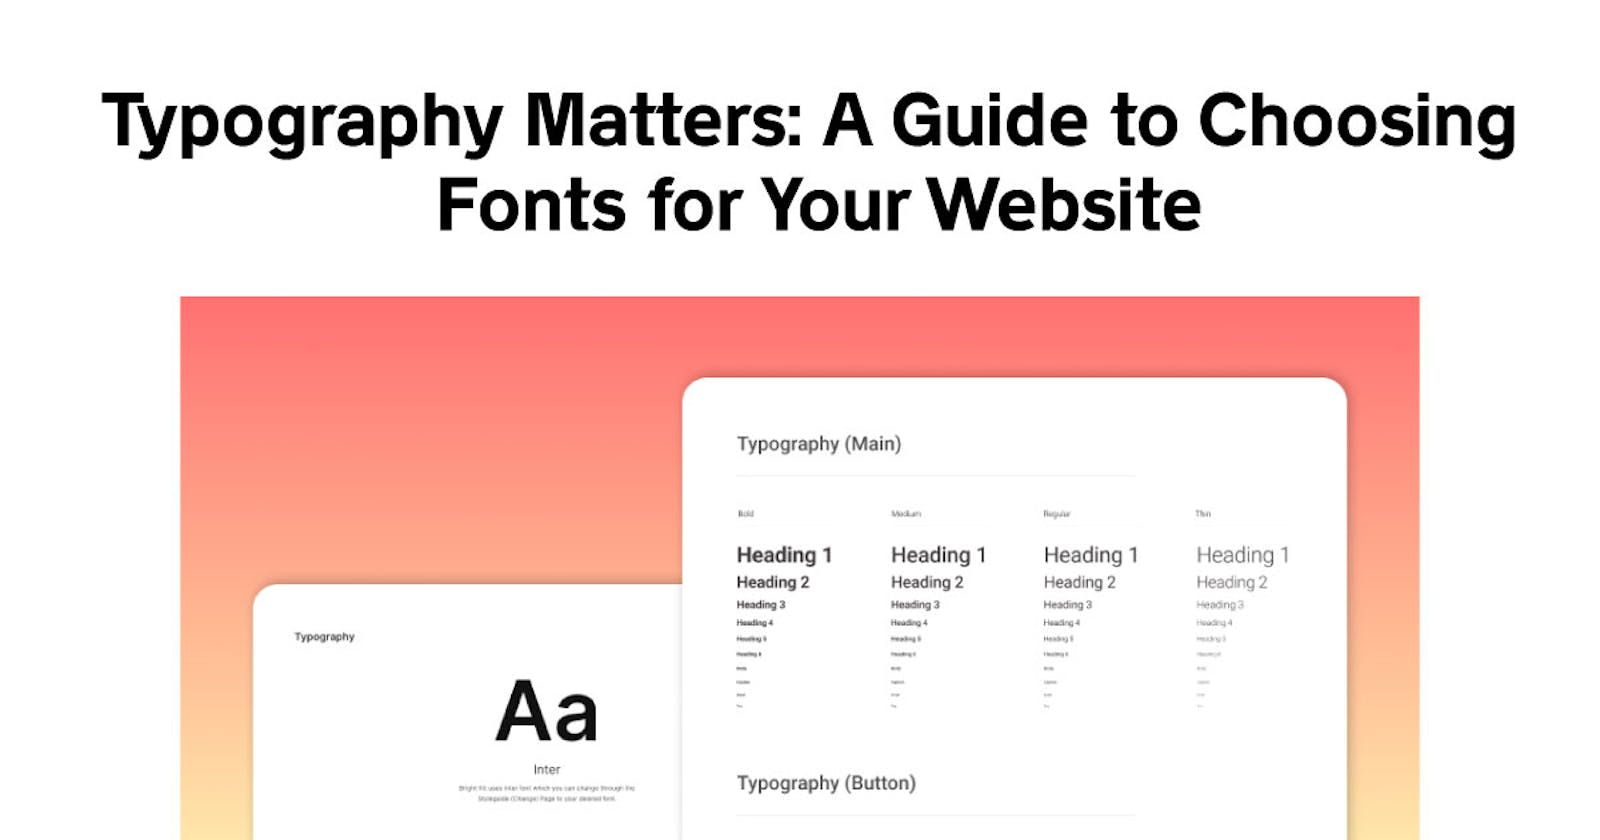 Typography Matters: A Guide to Choosing Fonts for Your Website